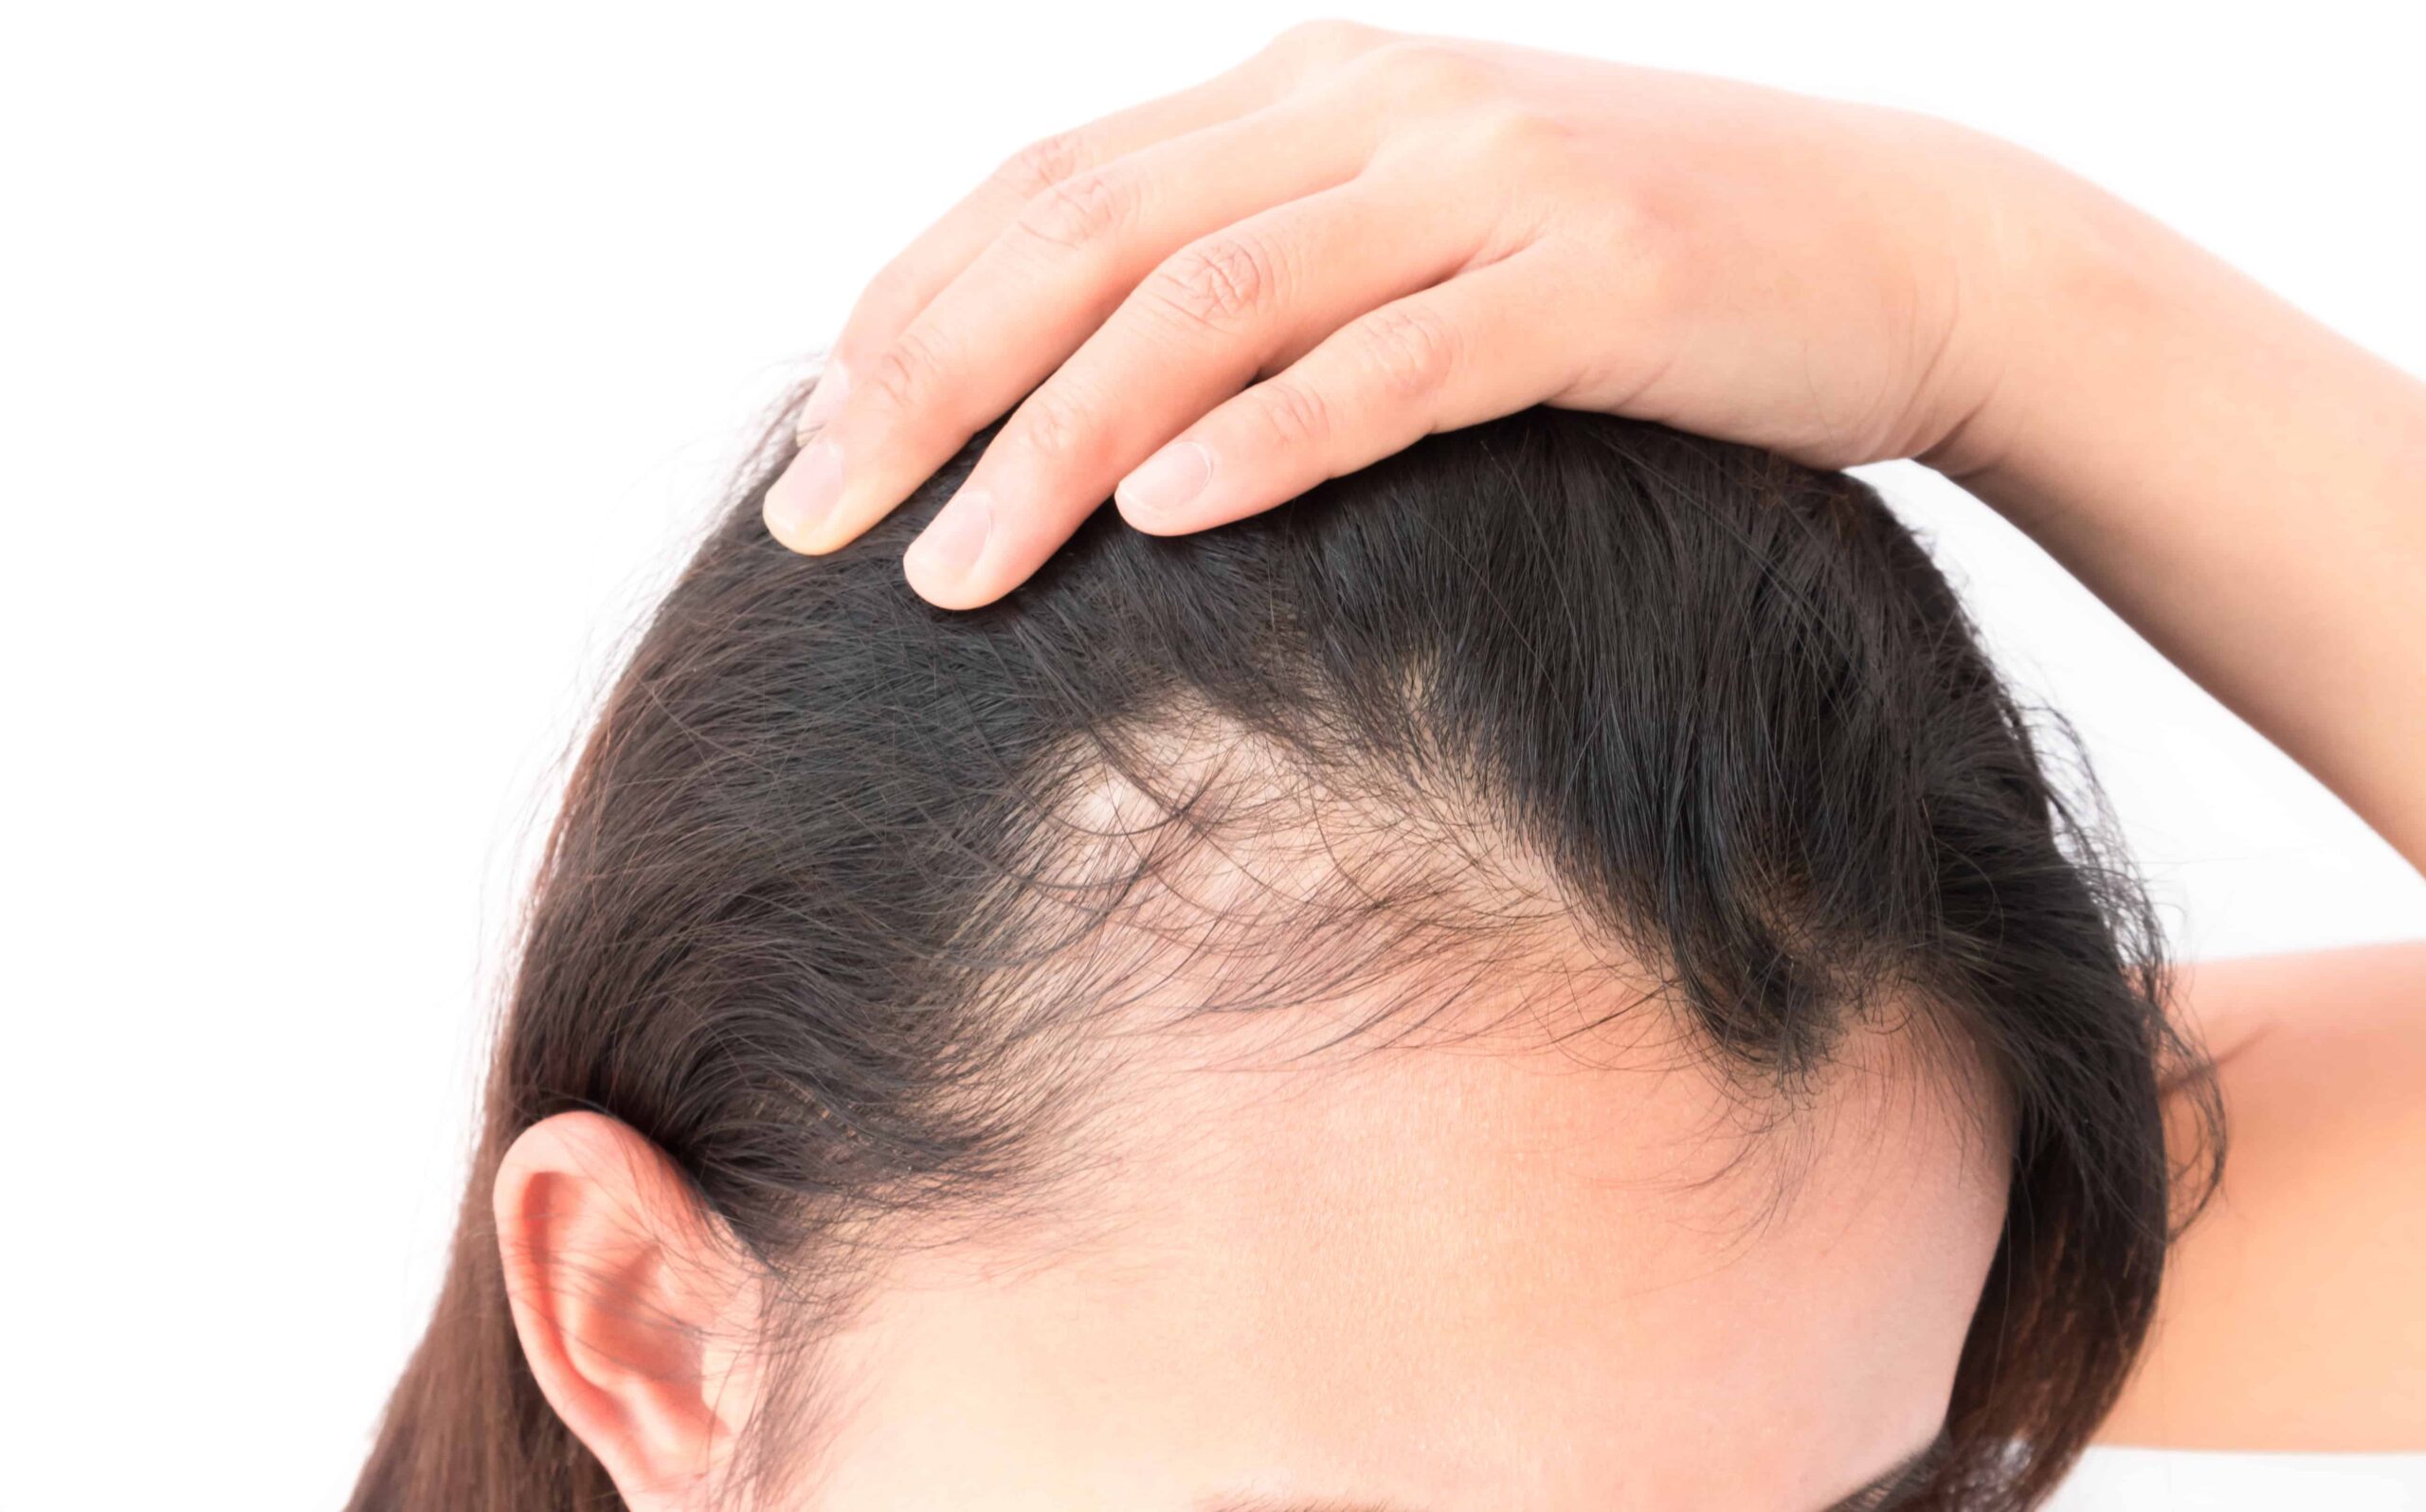 Alopecia Treatment Market is Estimated to Witness High Growth Owing to Opportunity of Rising Incidences of Alopecia